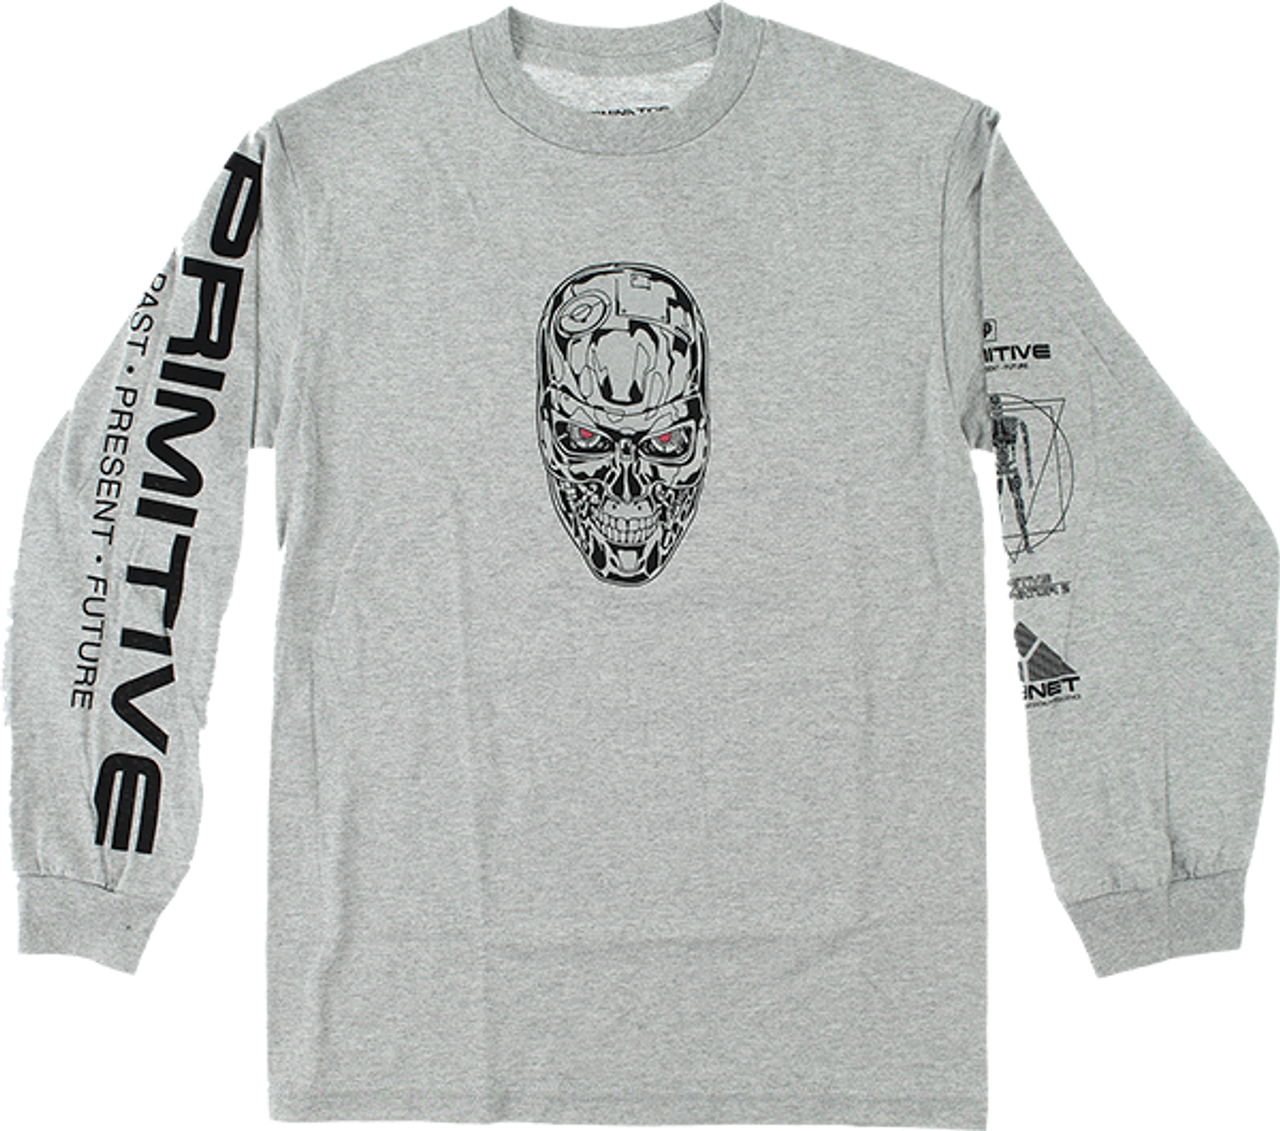 PRIMITIVE SKYNET LS SMALL HTH GRY